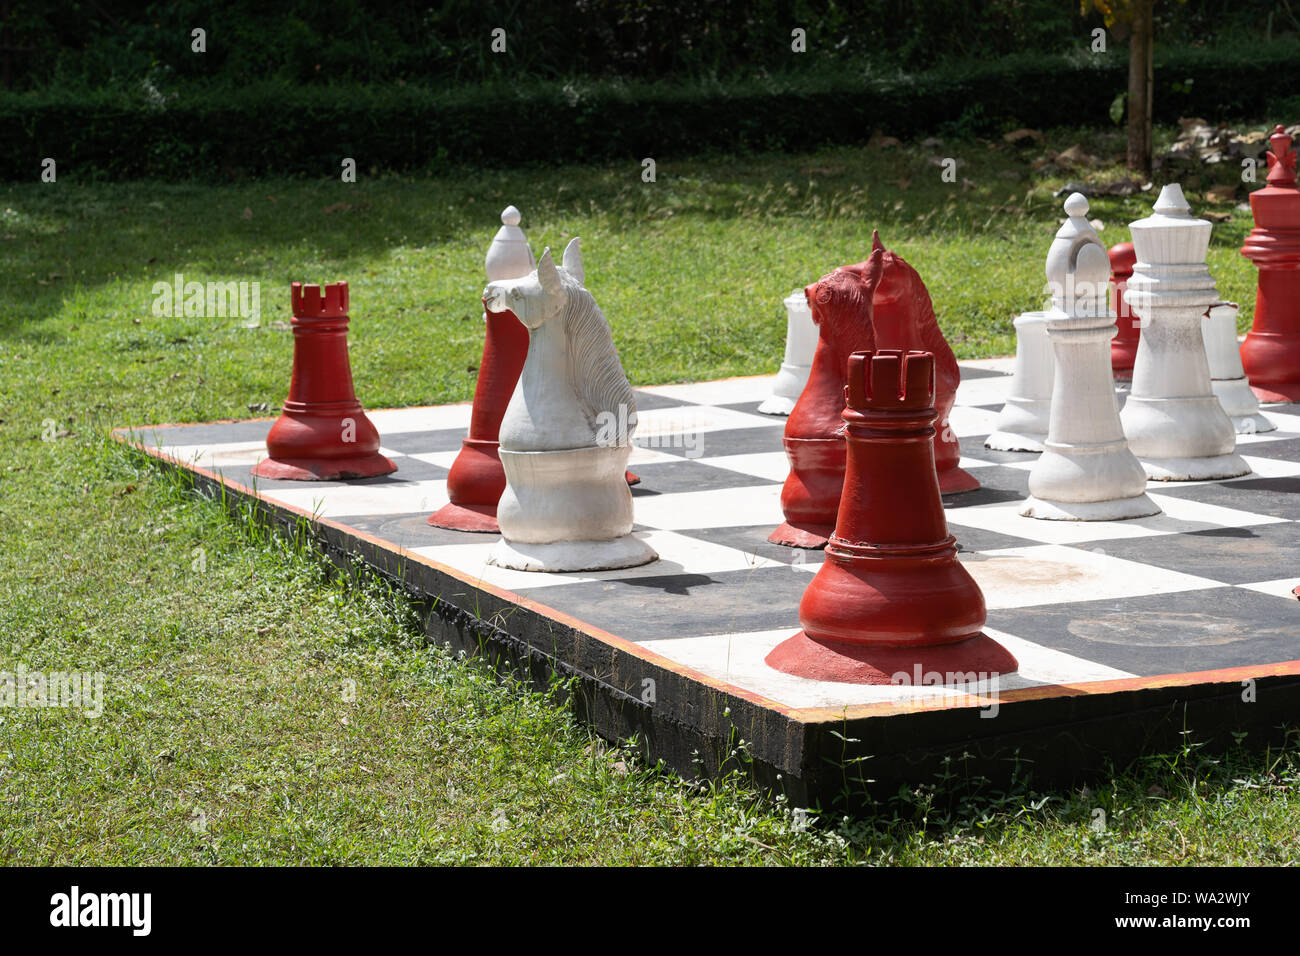 Vintage big chess, White and red chess in the garden background. Stock Photo